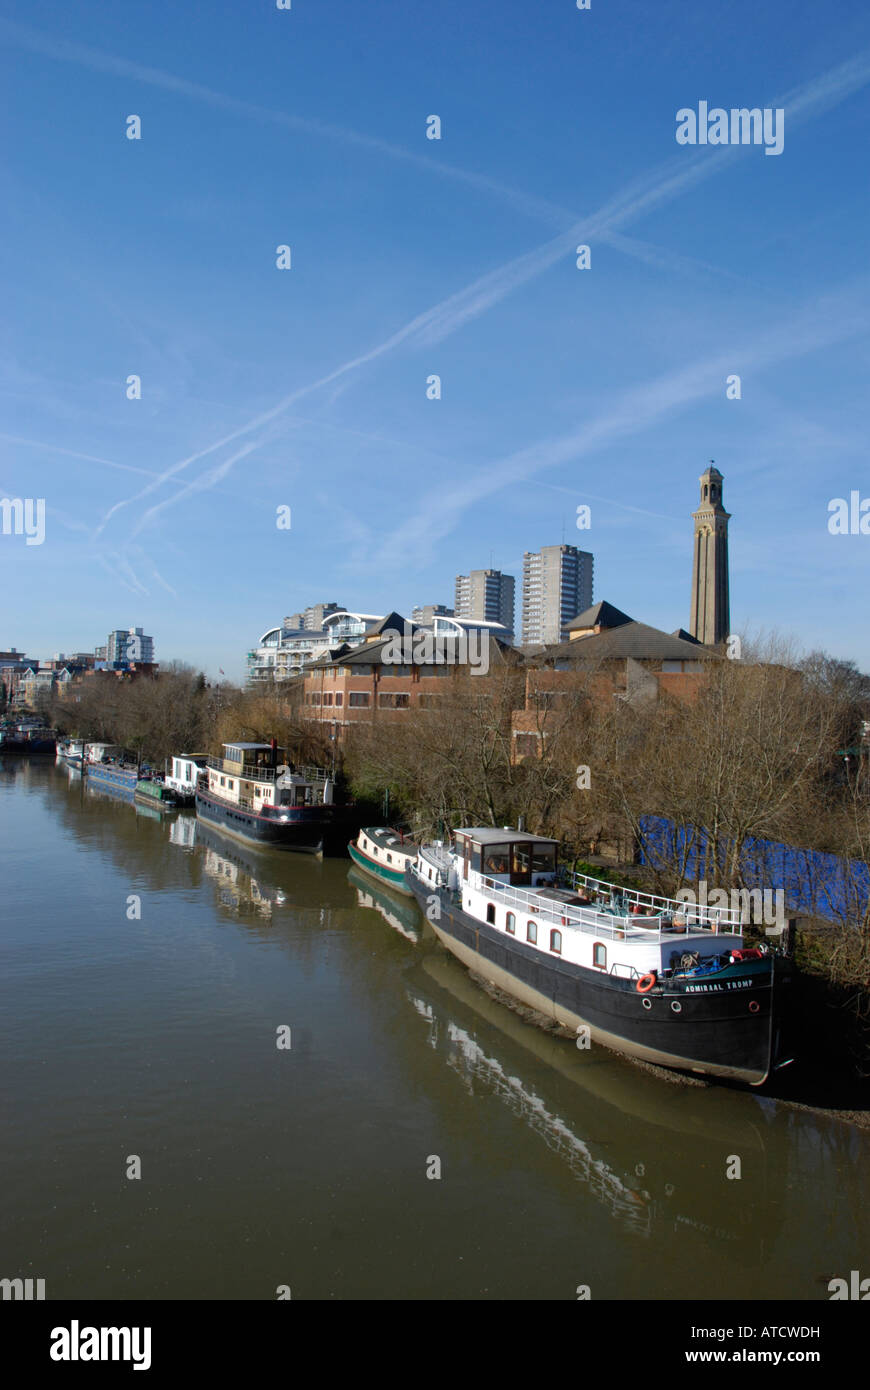 Houseboats on the River Thames at Brentford London England Stock Photo